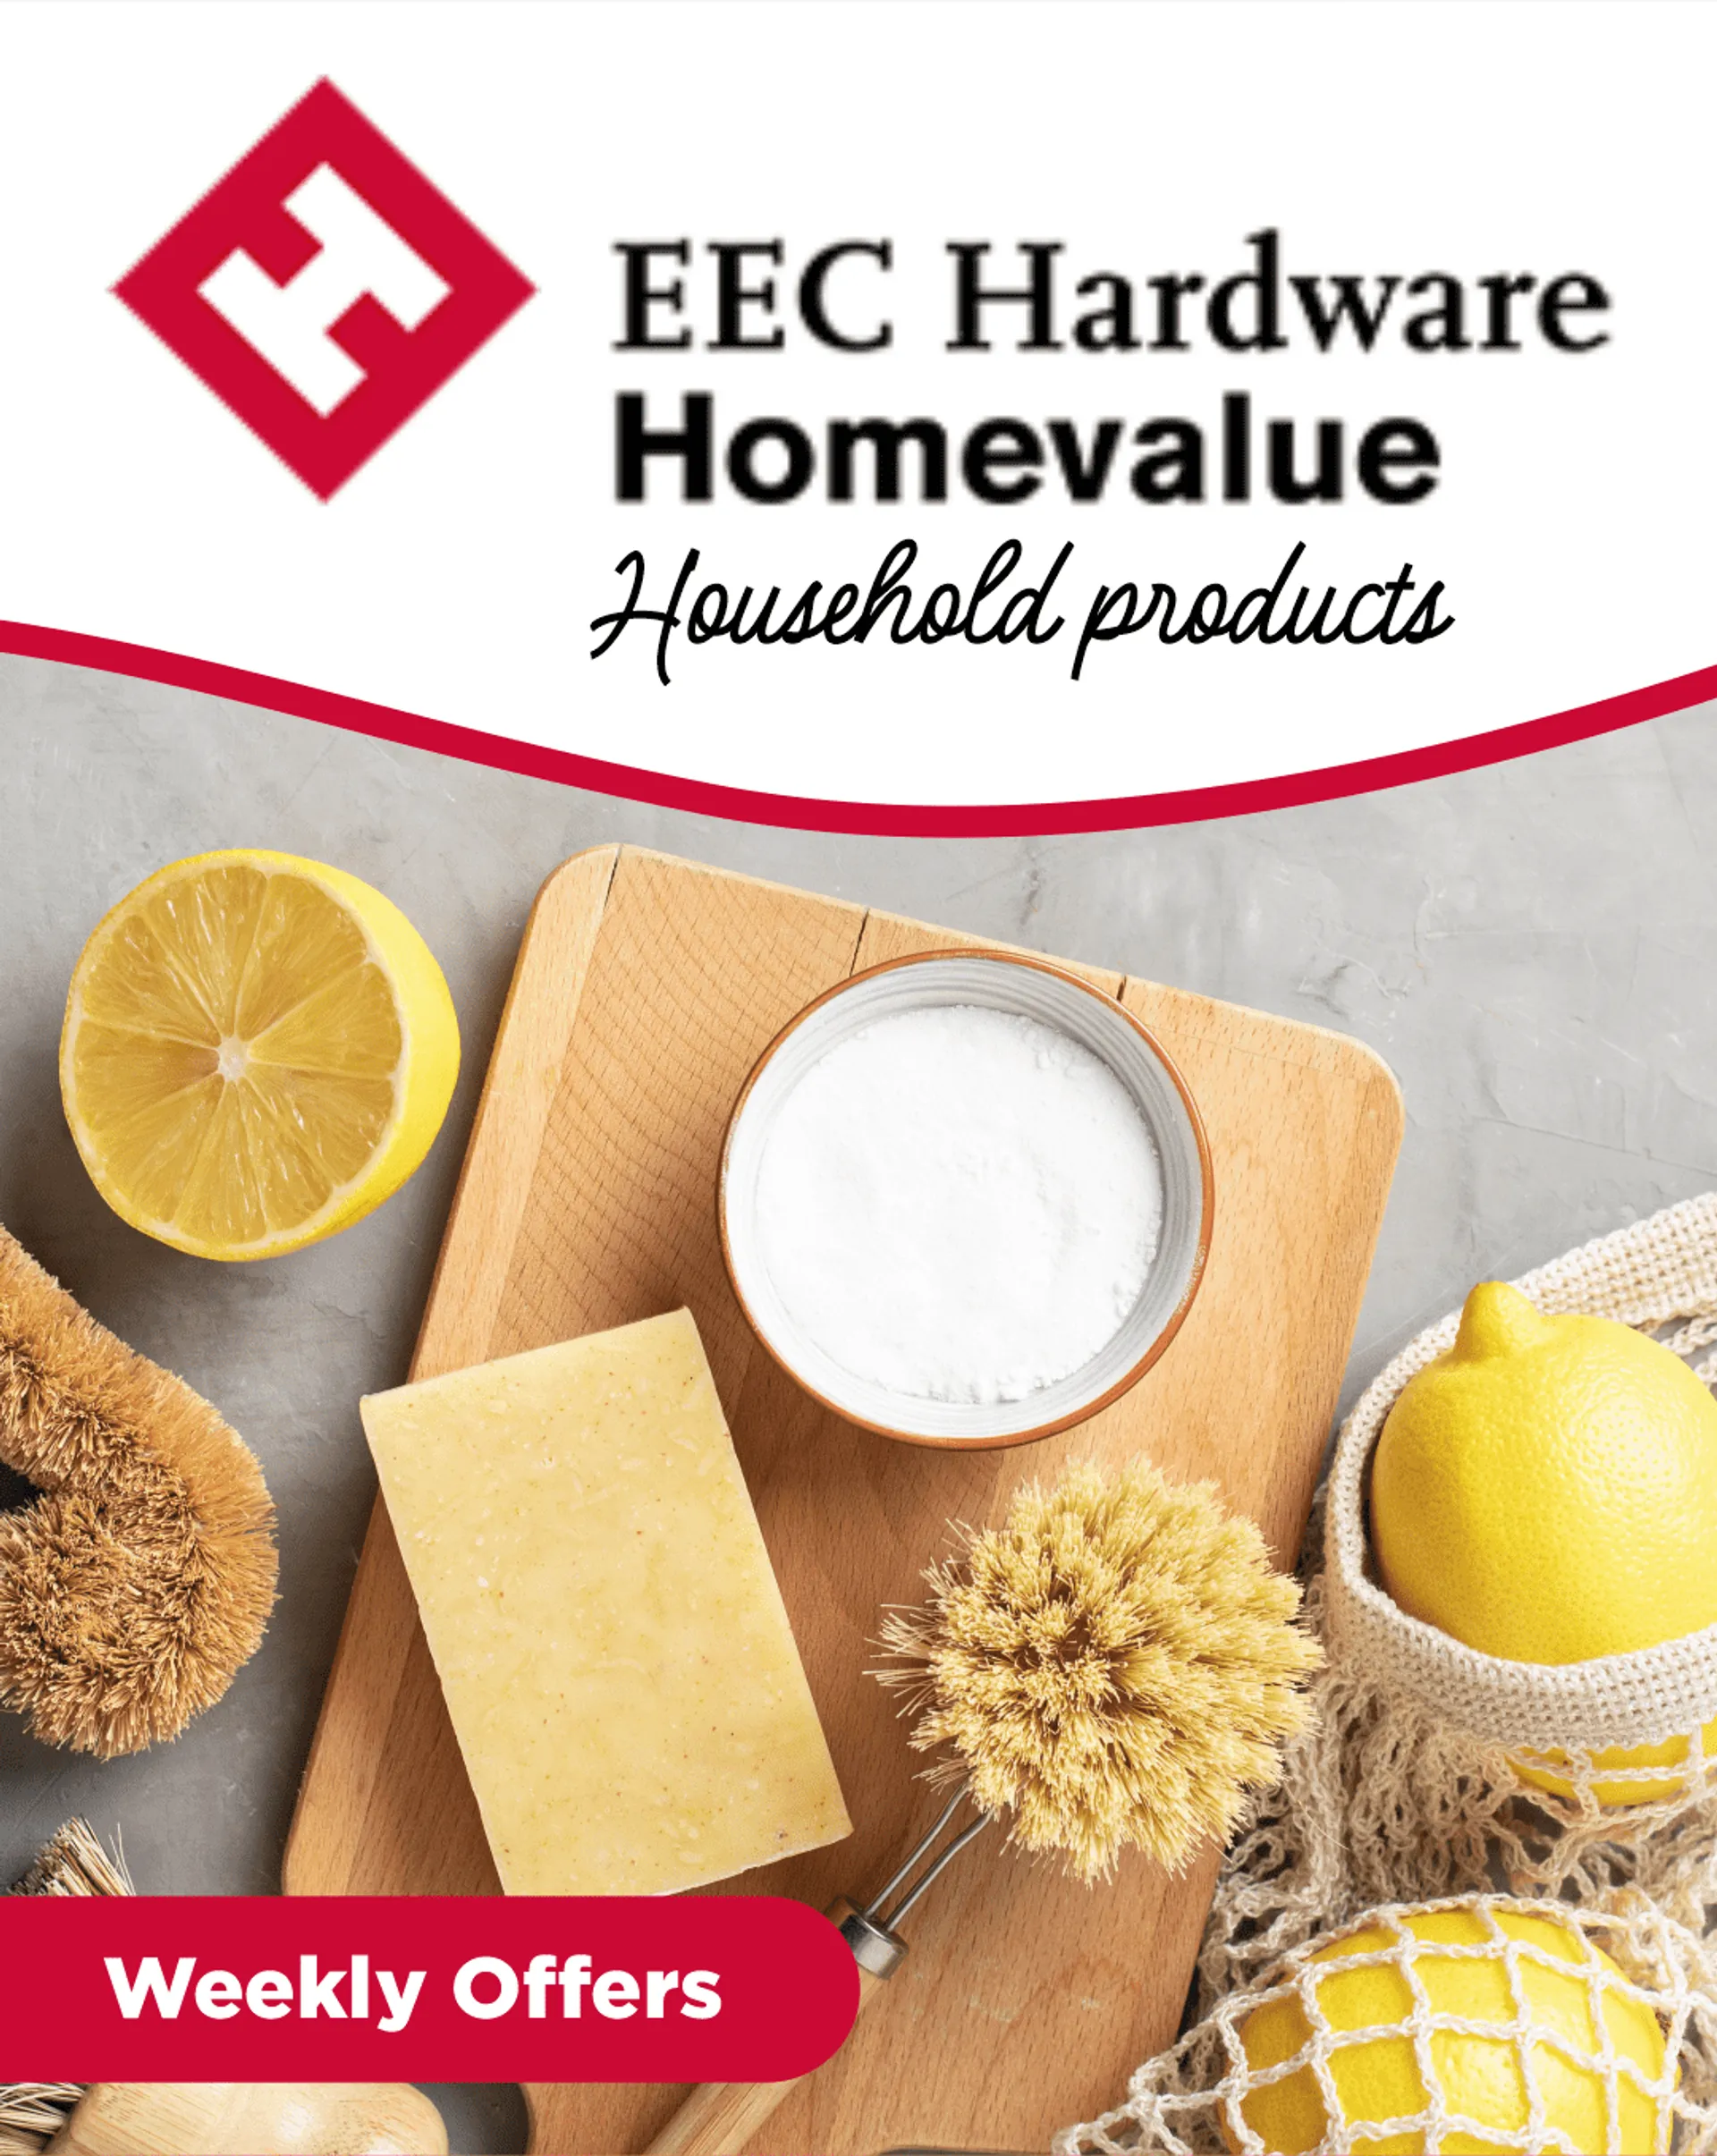 EEC Hardware - DIY & Hardware - Household products